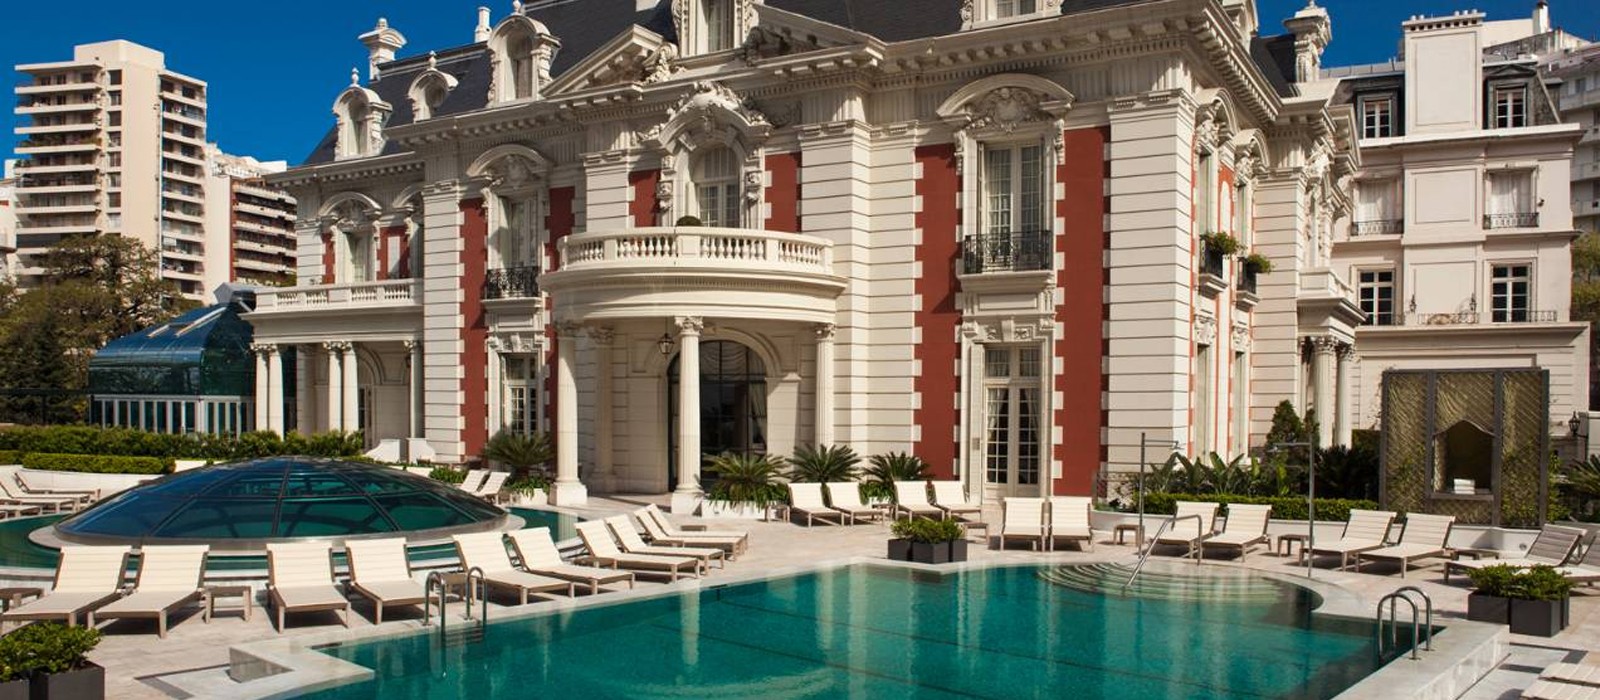 header - four seasons buenos aires - luxury argentina holiday packages